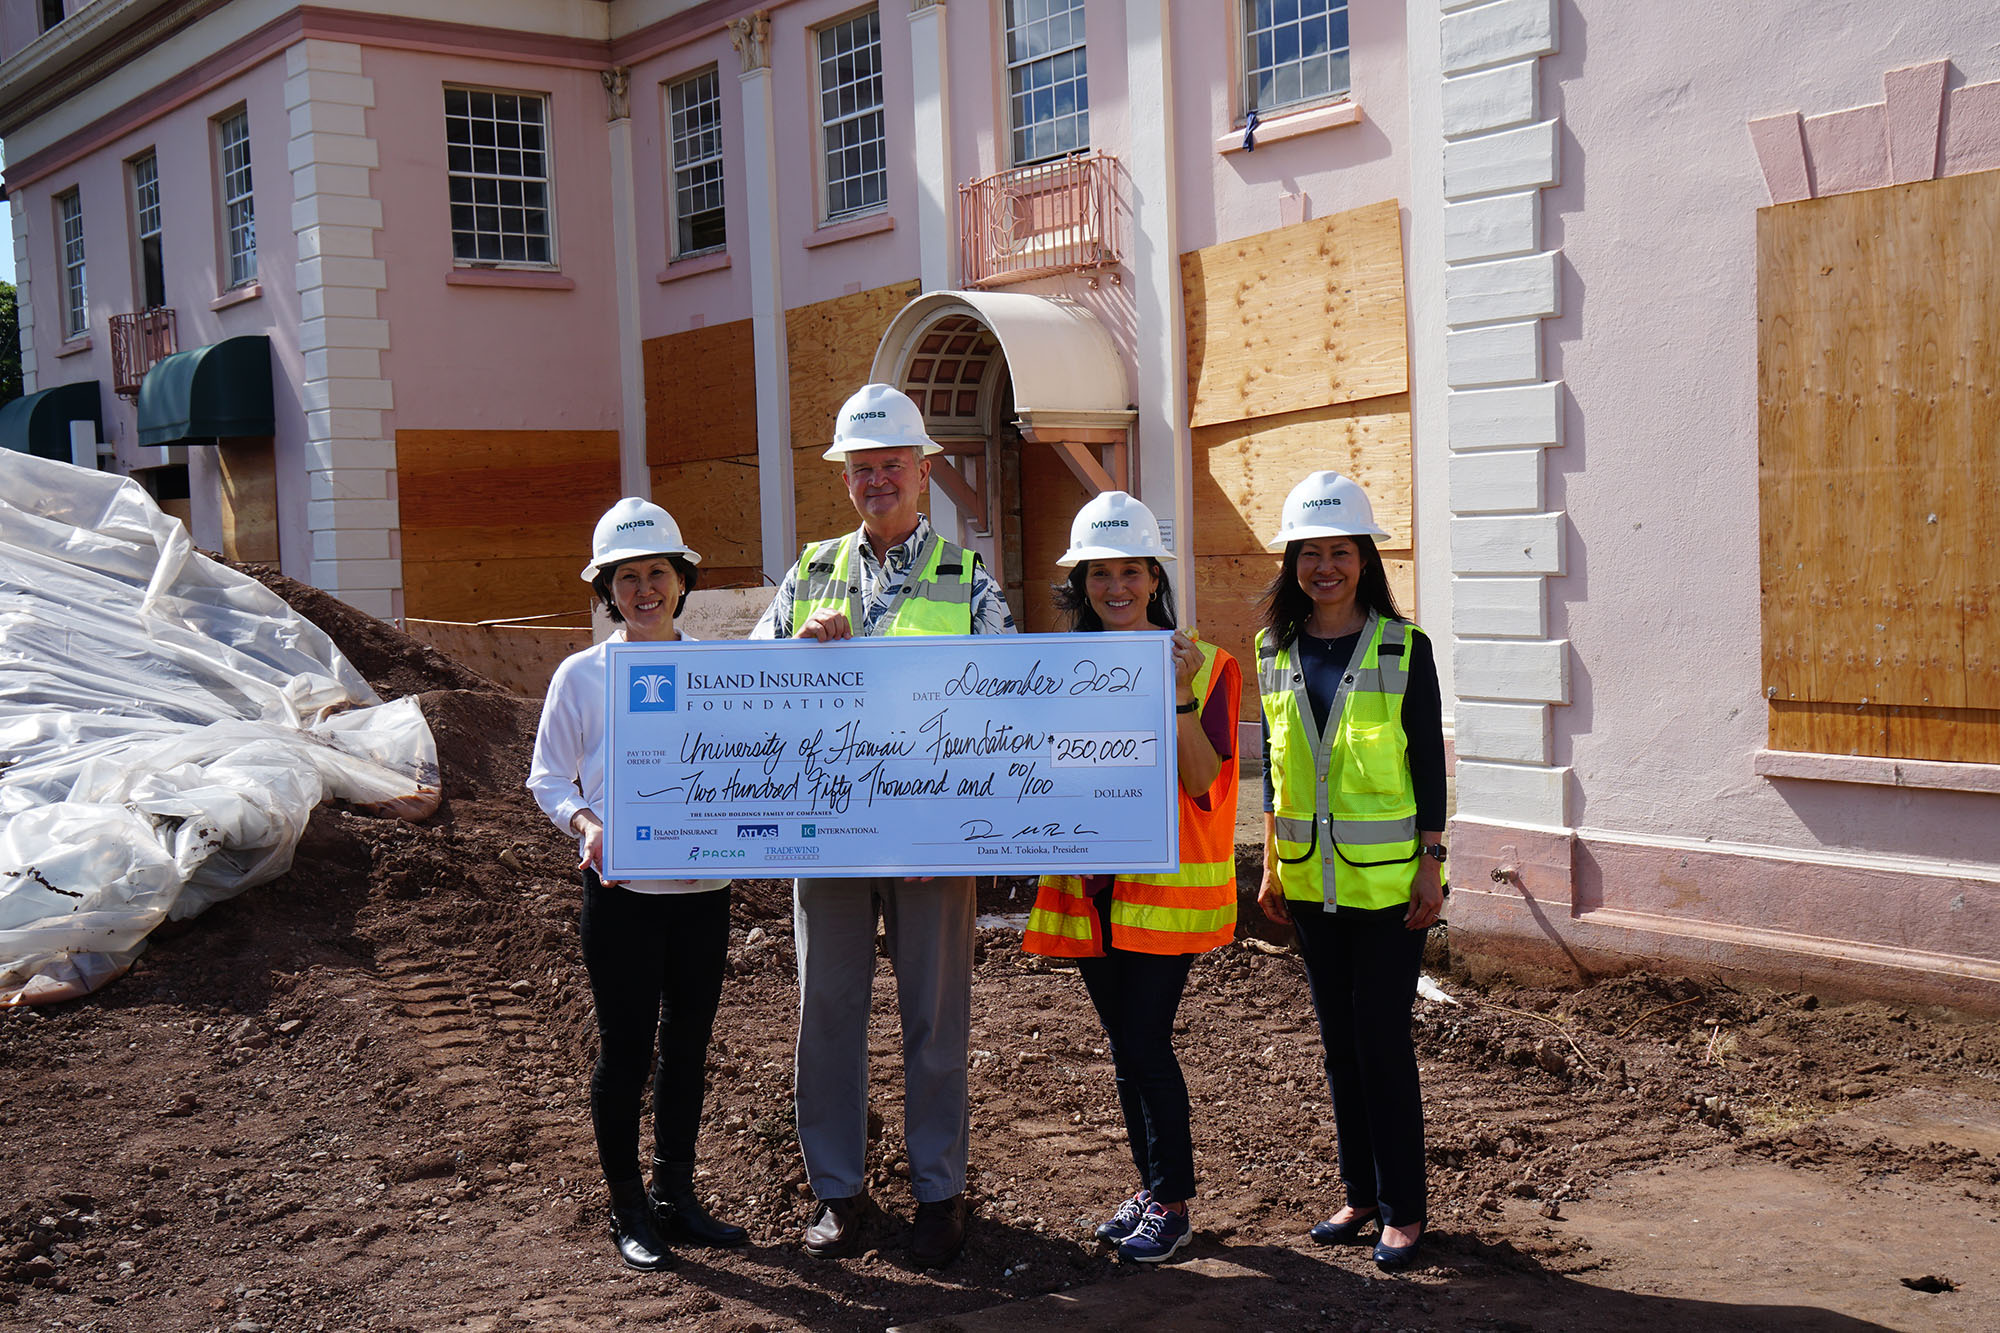 Susan Yamada, Vance Roley, Dana Tokioka and Kristi Bates hold a large check in front of the RISE project at the University of Hawaii